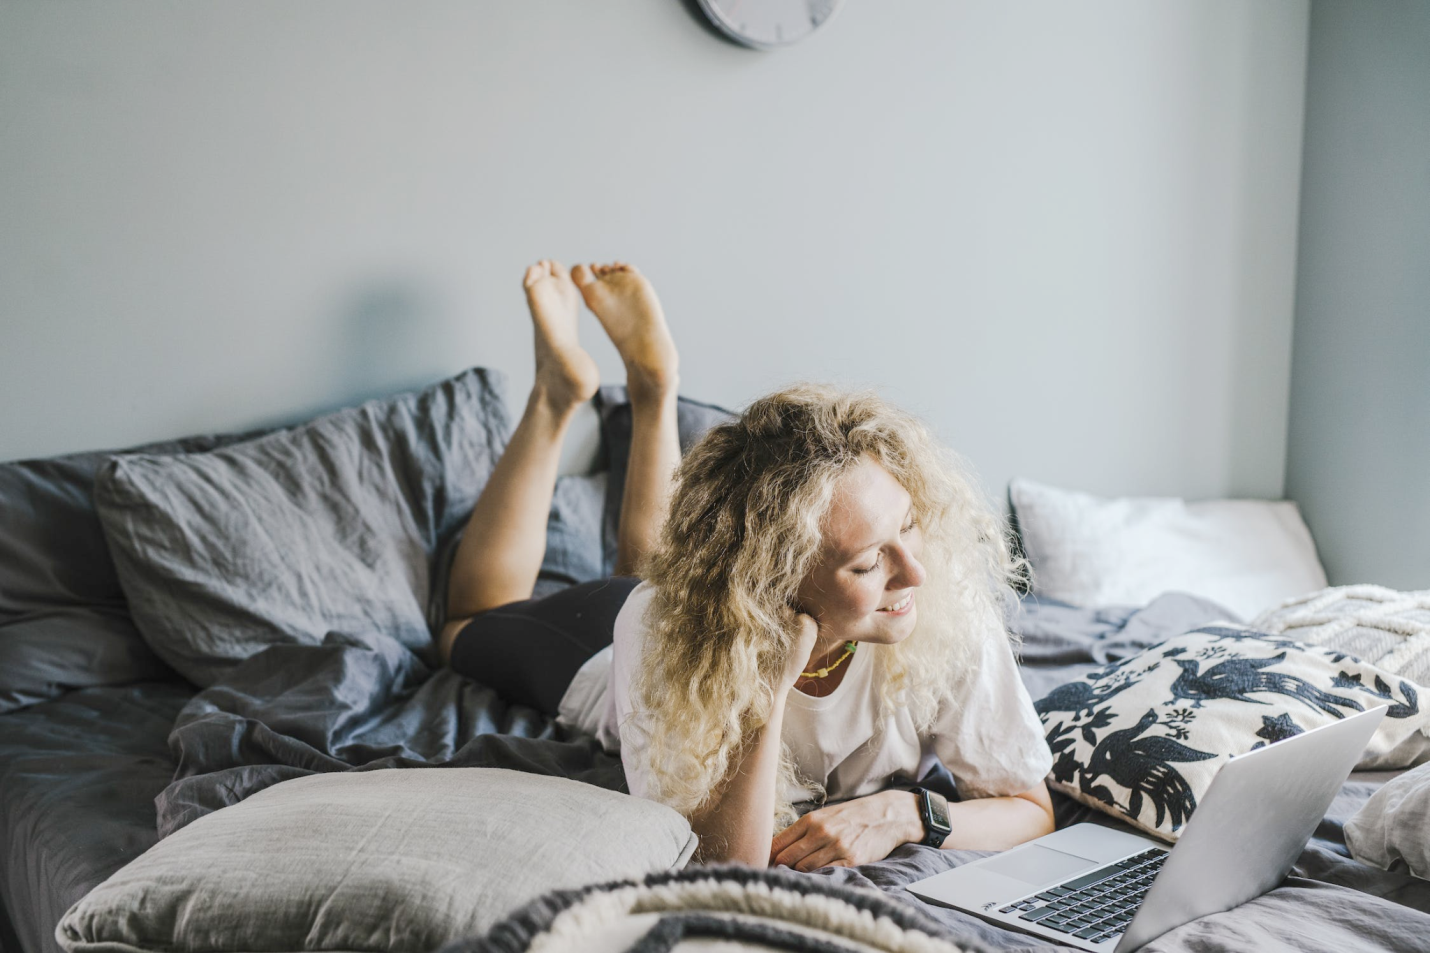 An image of a woman lying on the bed watching something on a laptop